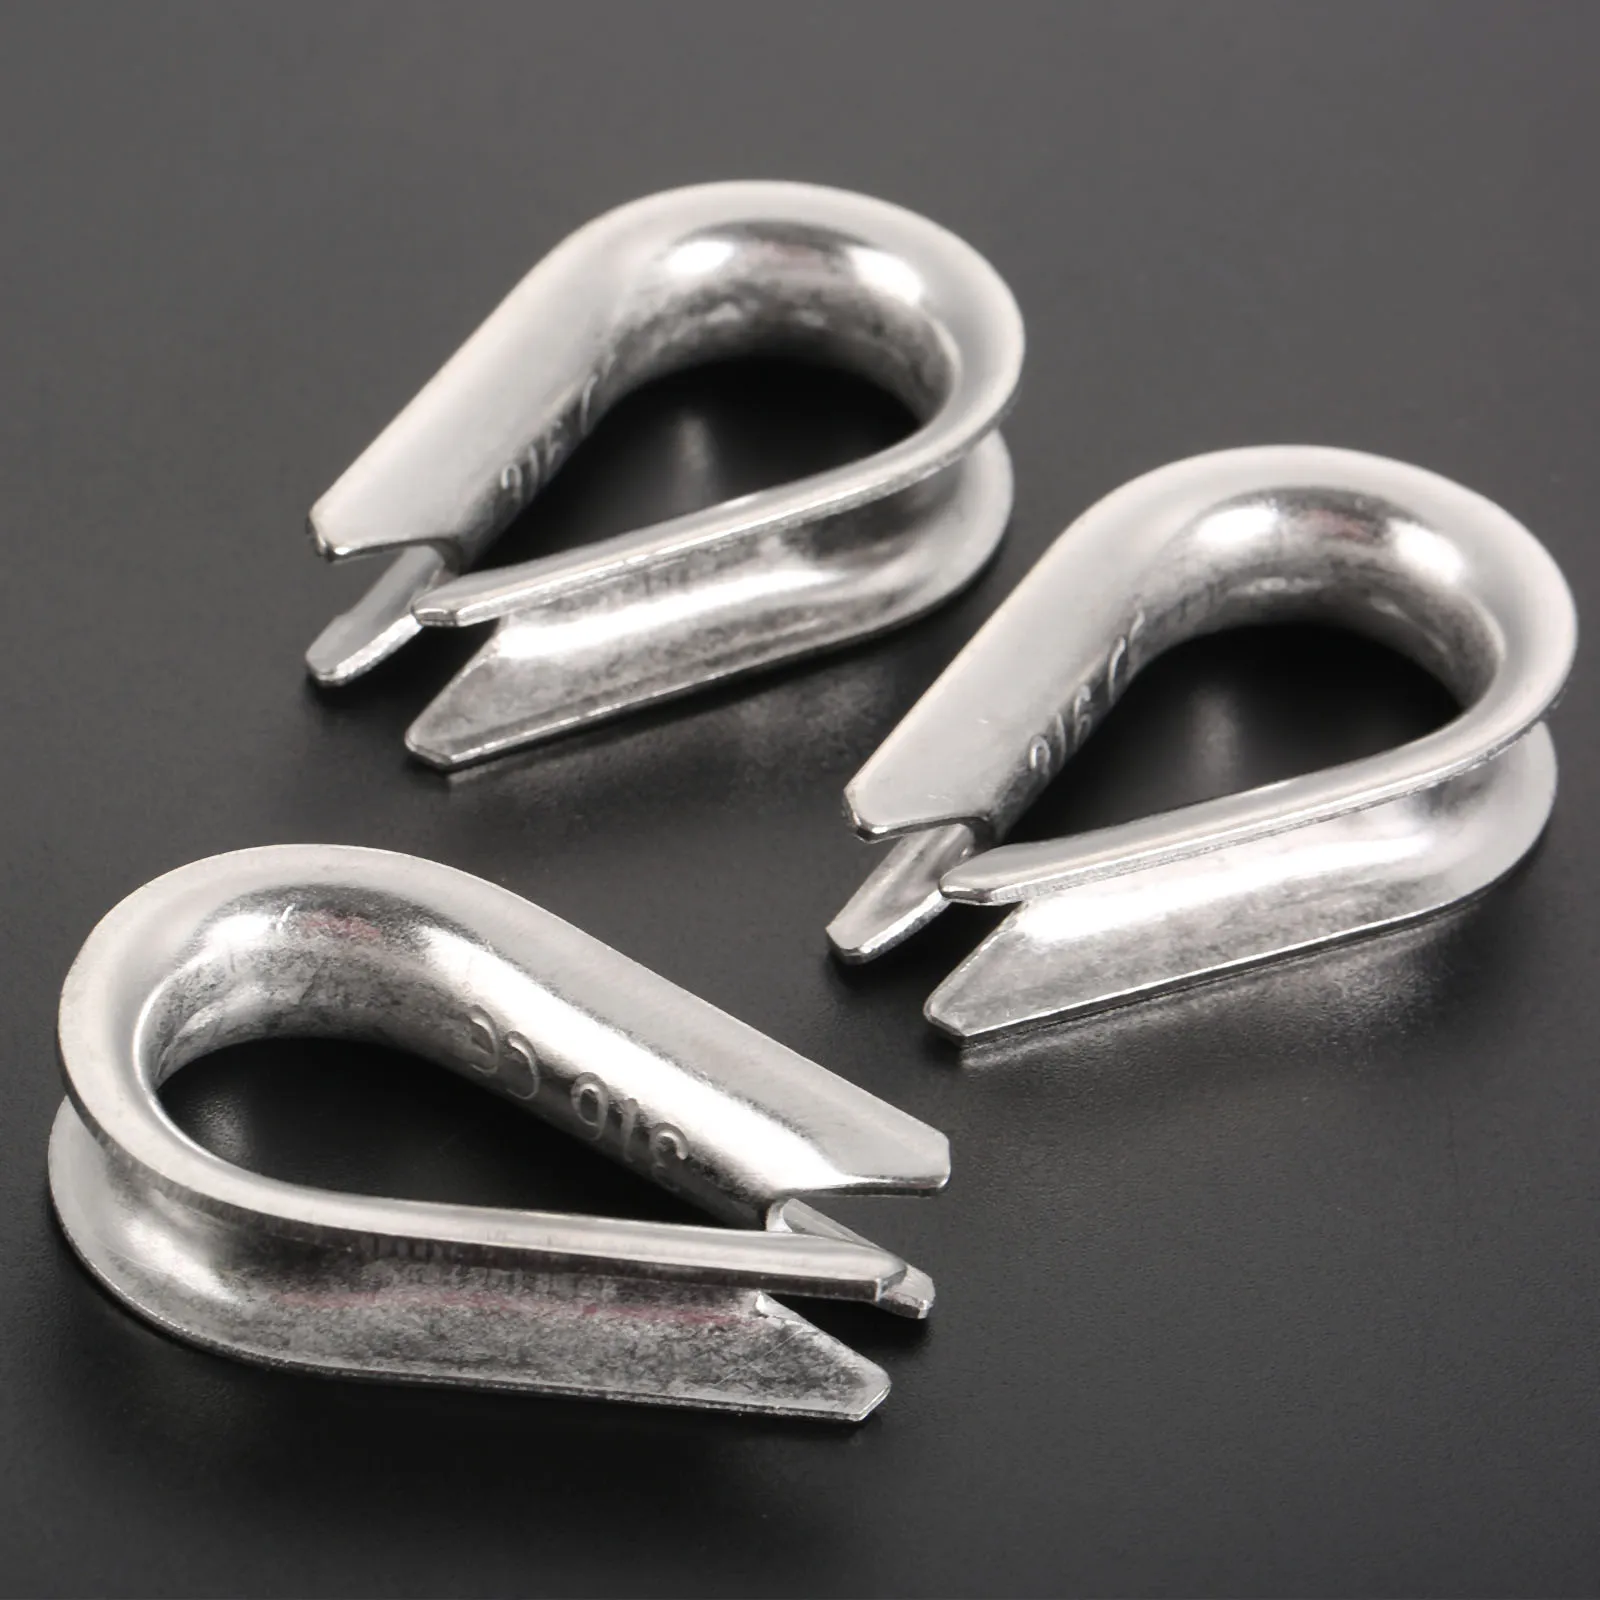 10Pcs Wire Rope Thimbles Marine Grade 316 Stainless Steel for 8mm / 5/16 Inch Diameter Wire Rope/Cable Boats Accessories 10pcs wire rope thimbles marine grade 316 stainless steel for 8mm 5 16 inch diameter wire rope cable boats accessories